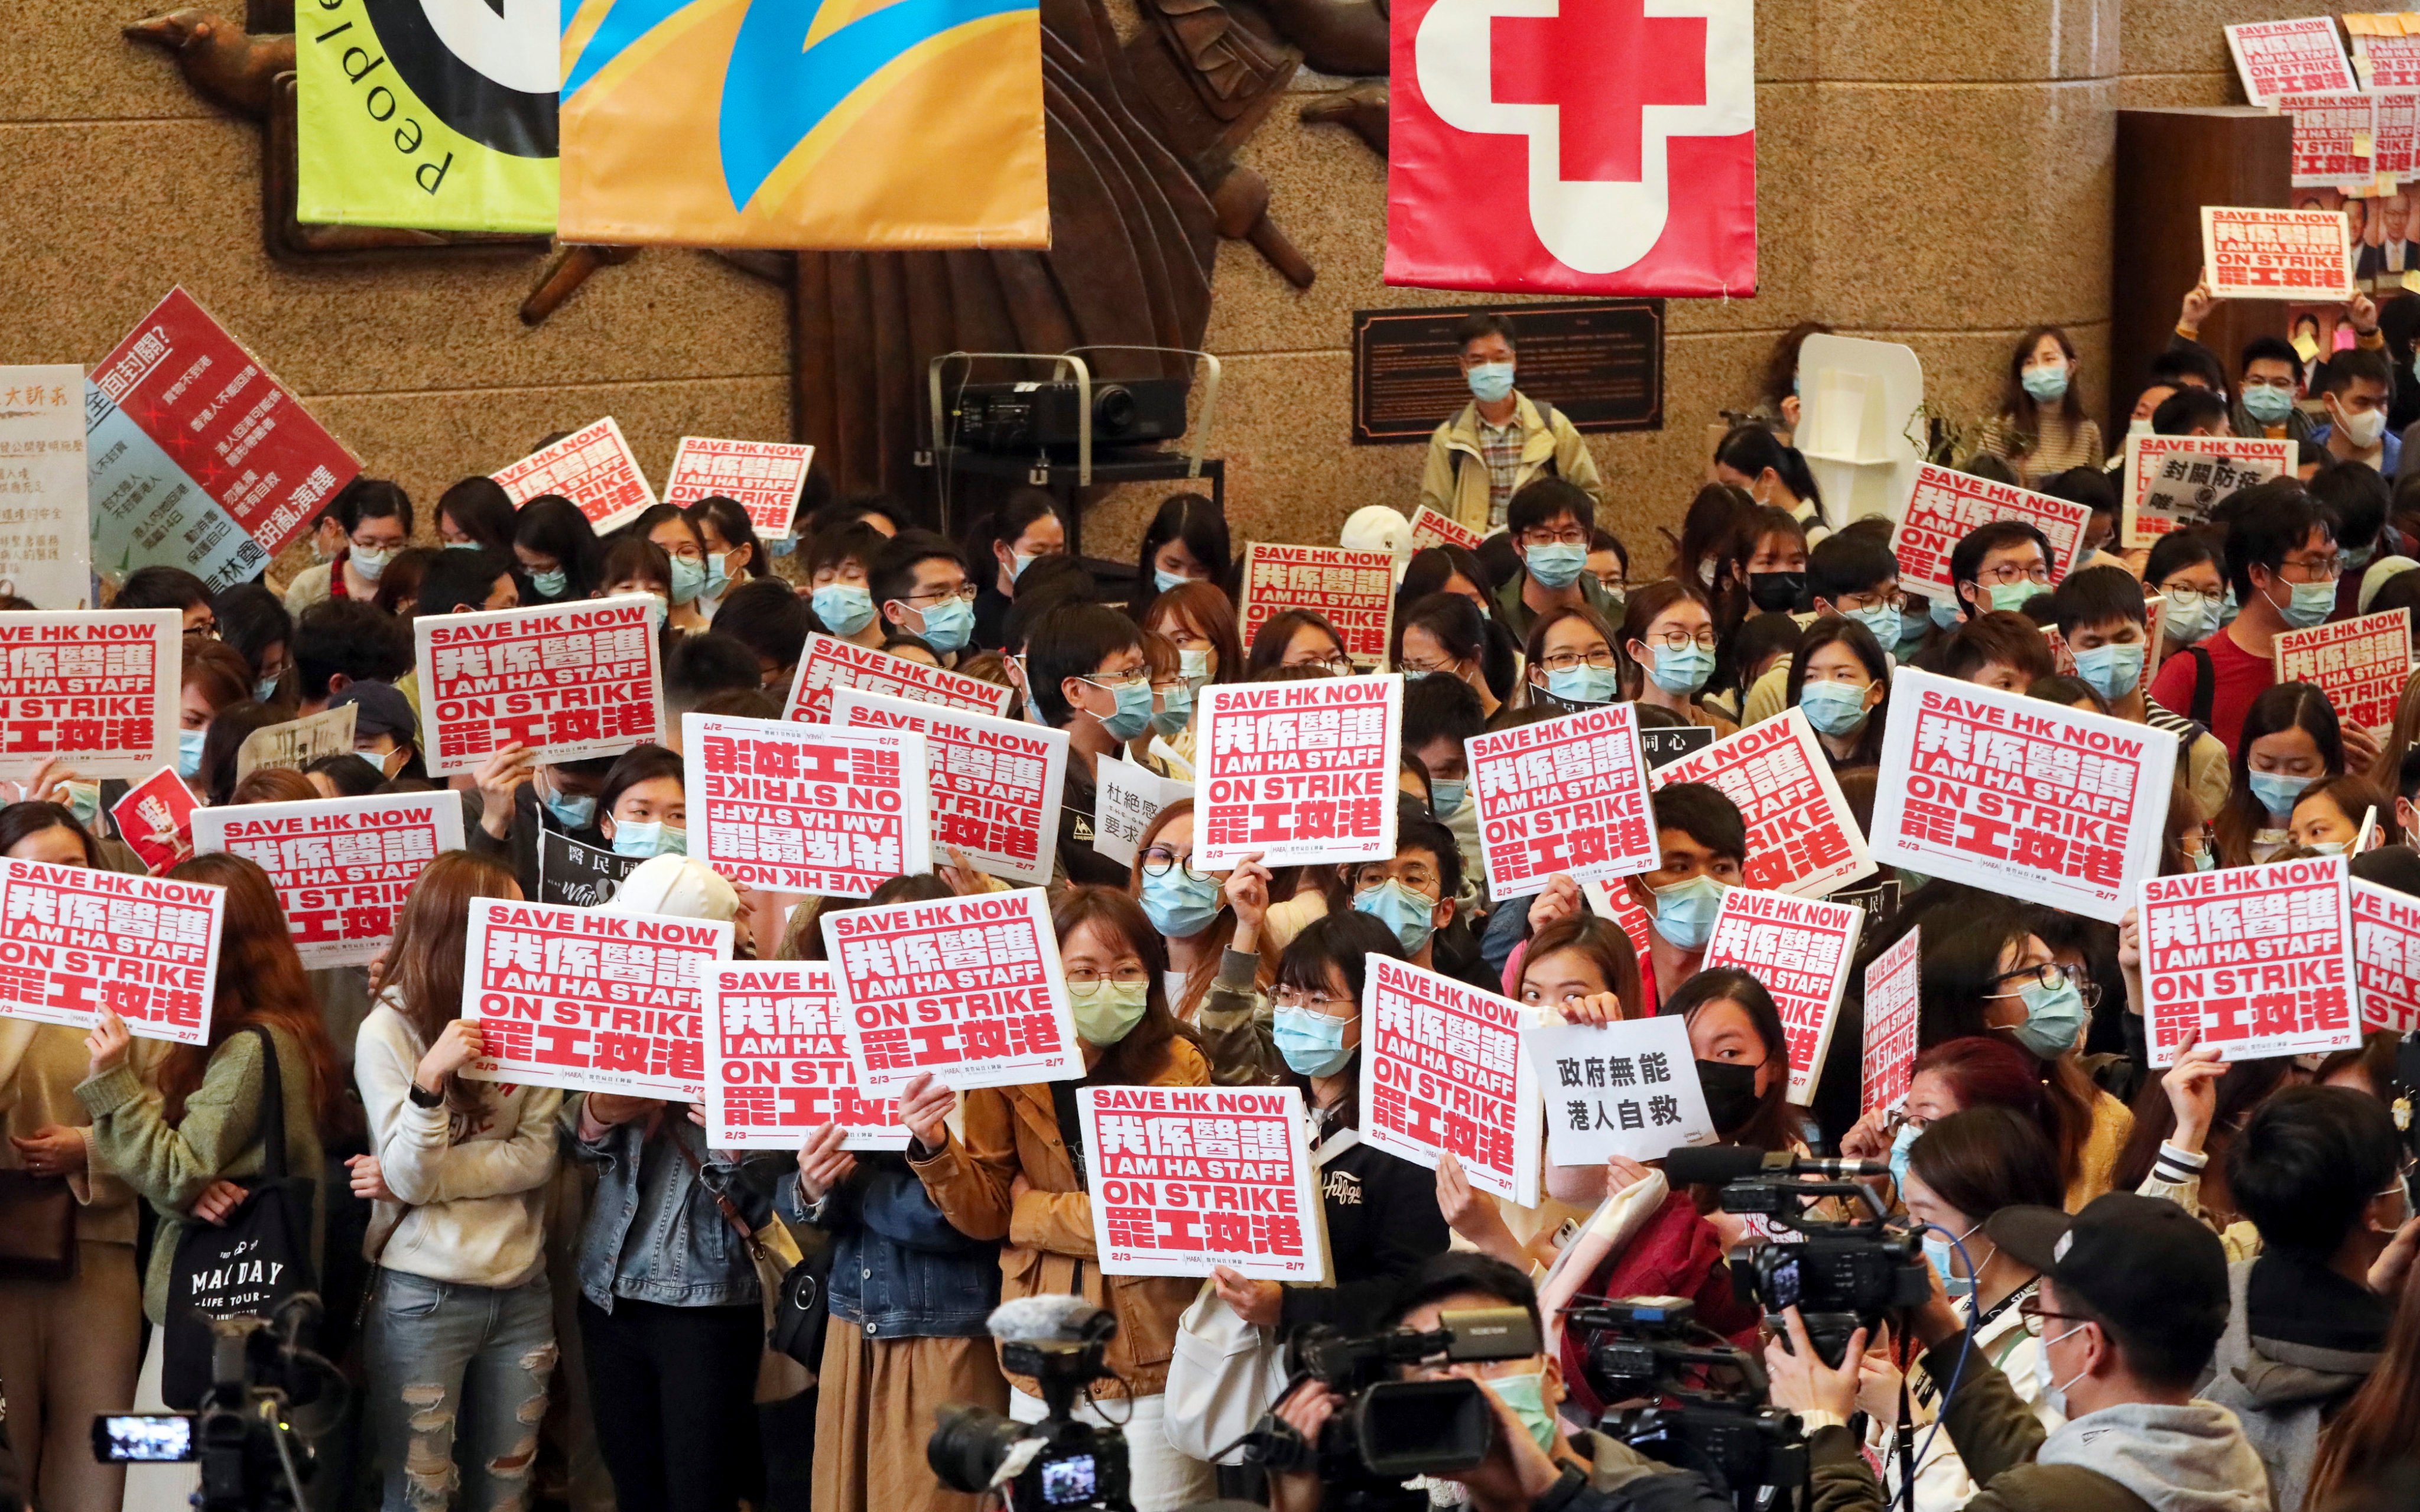 The Hospital Authority Employees Alliance in February 2020 called for authorities to close the border with mainland China during the early stages of the coronavirus pandemic. Photo: Felix Wong